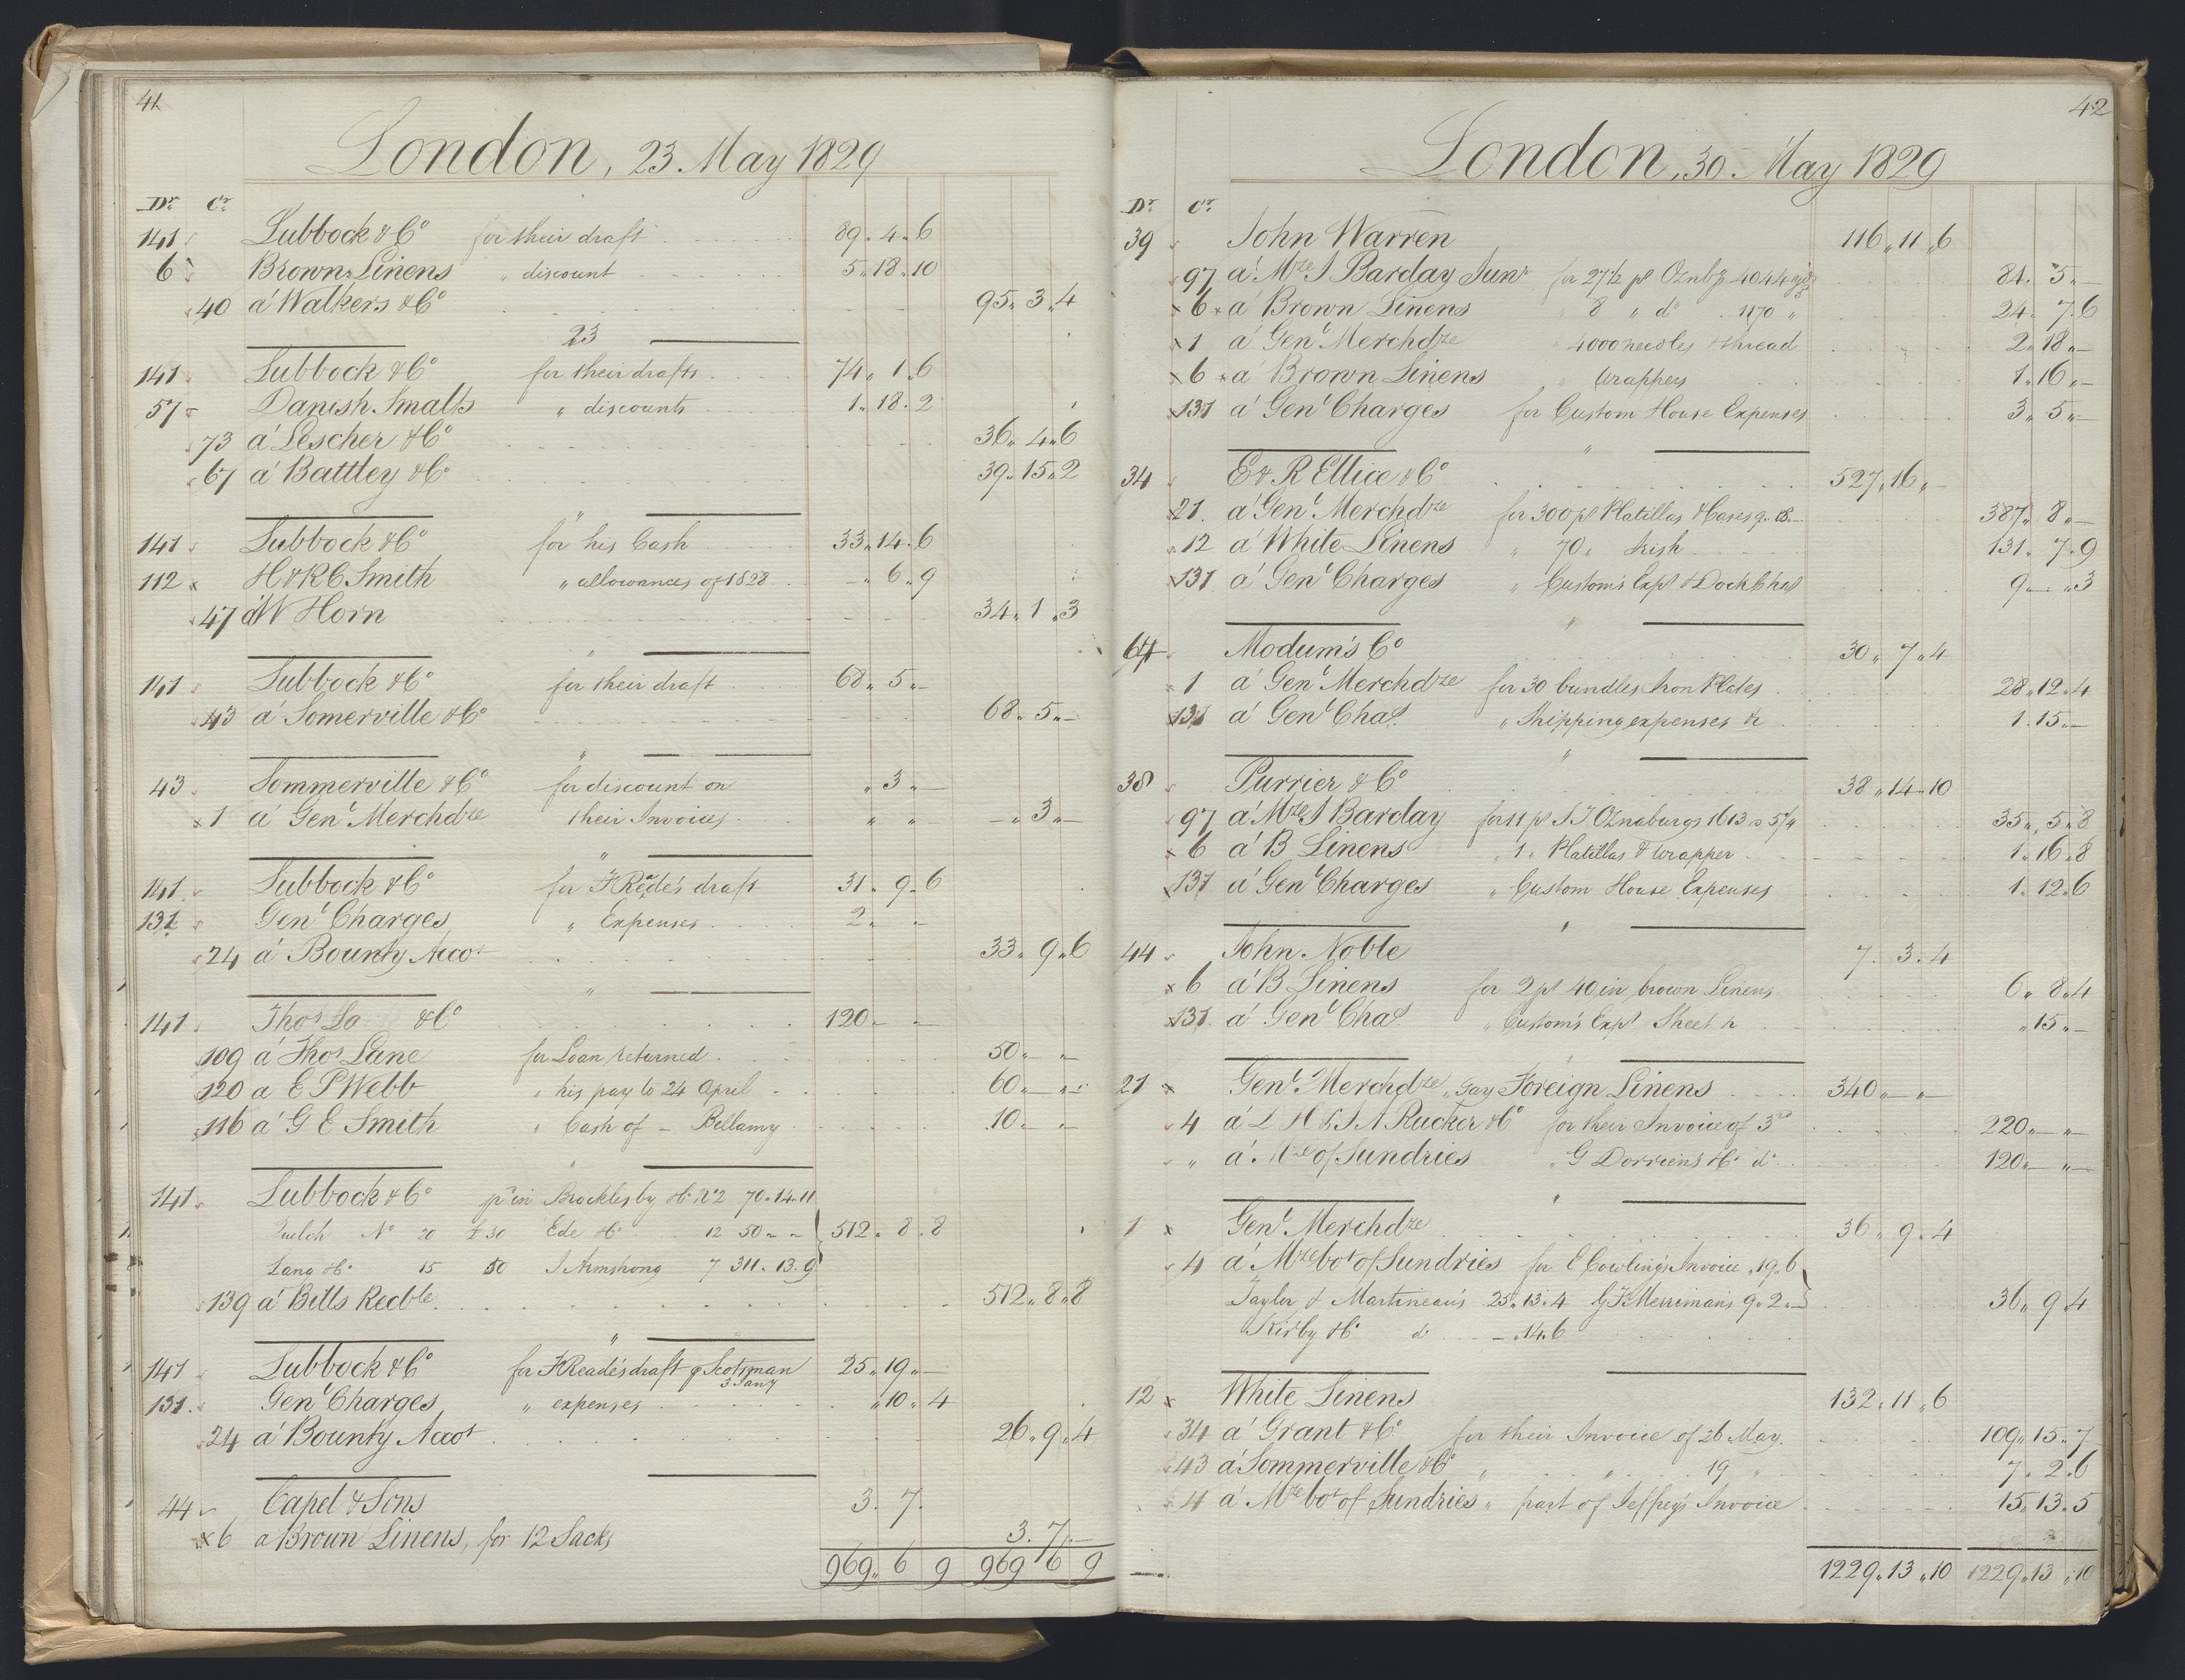 Smith, Goodhall & Reeves, RA/PA-0586/R/L0001: Dagbok (Daybook) A, 1829-1831, s. 41-42